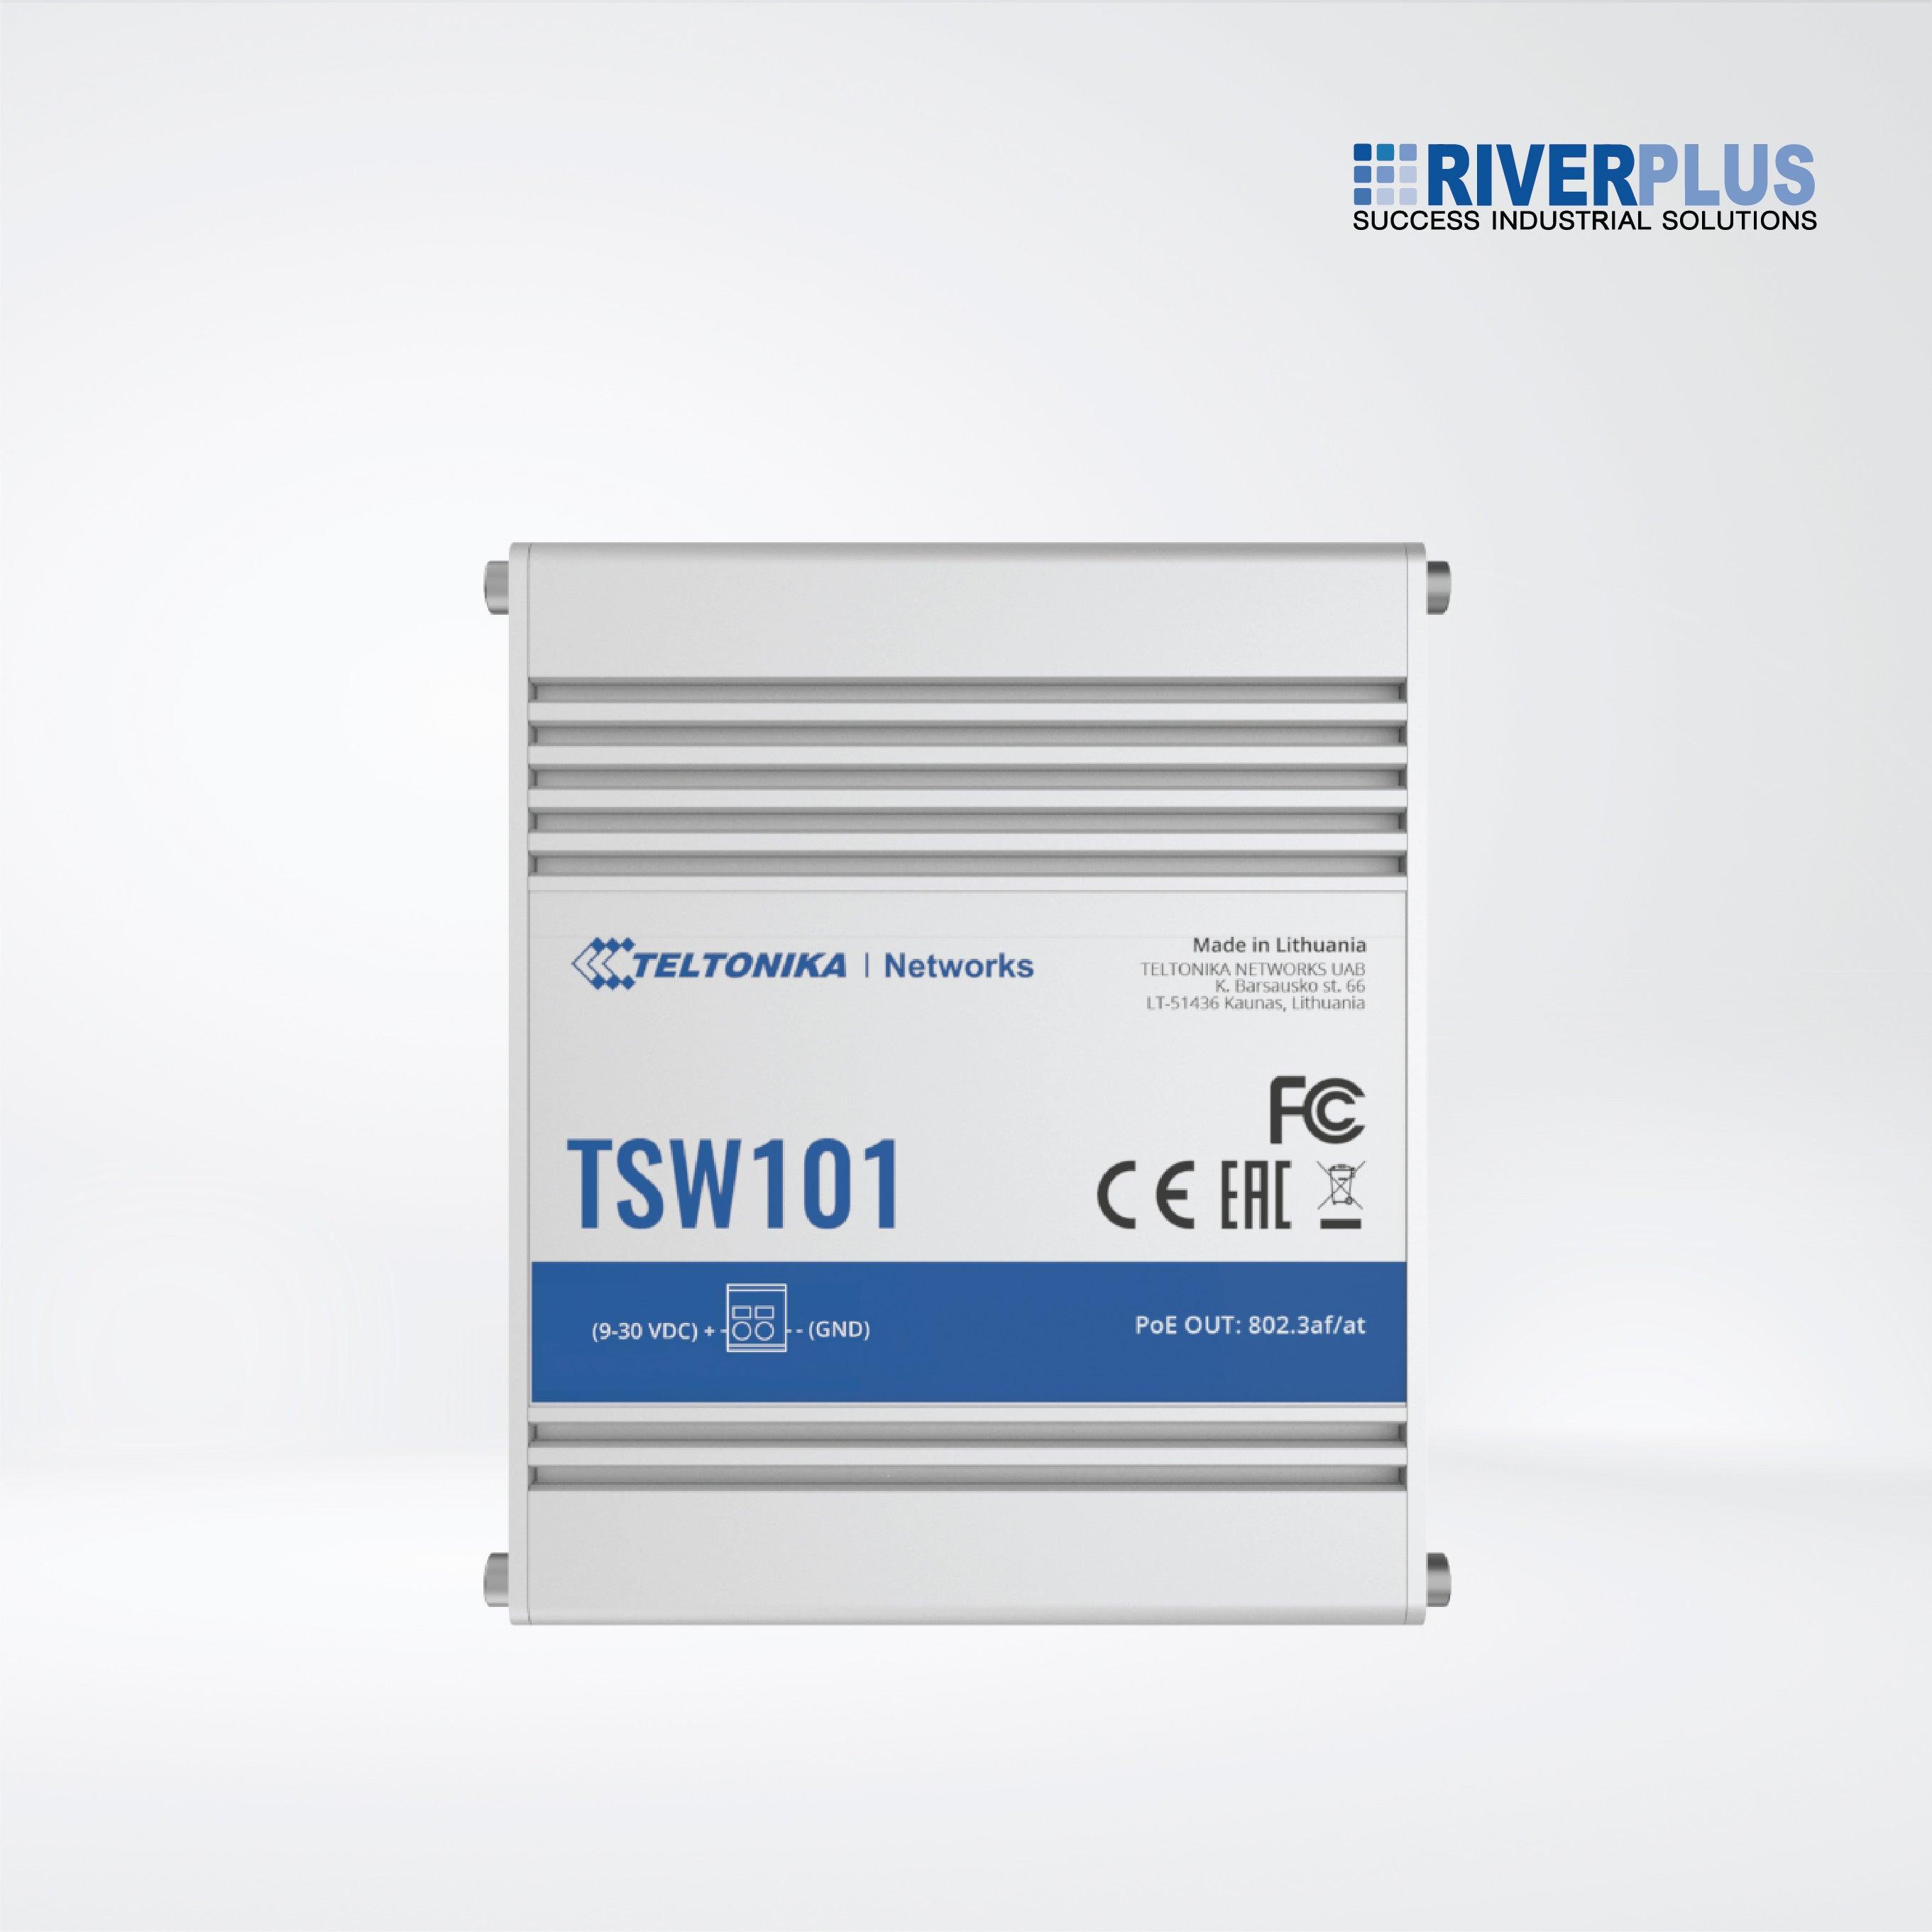 TSW101 5 x Gigabit Ethernet ports , 4 x PoE+ ports Ideal for in-vehicle solutions - Riverplus